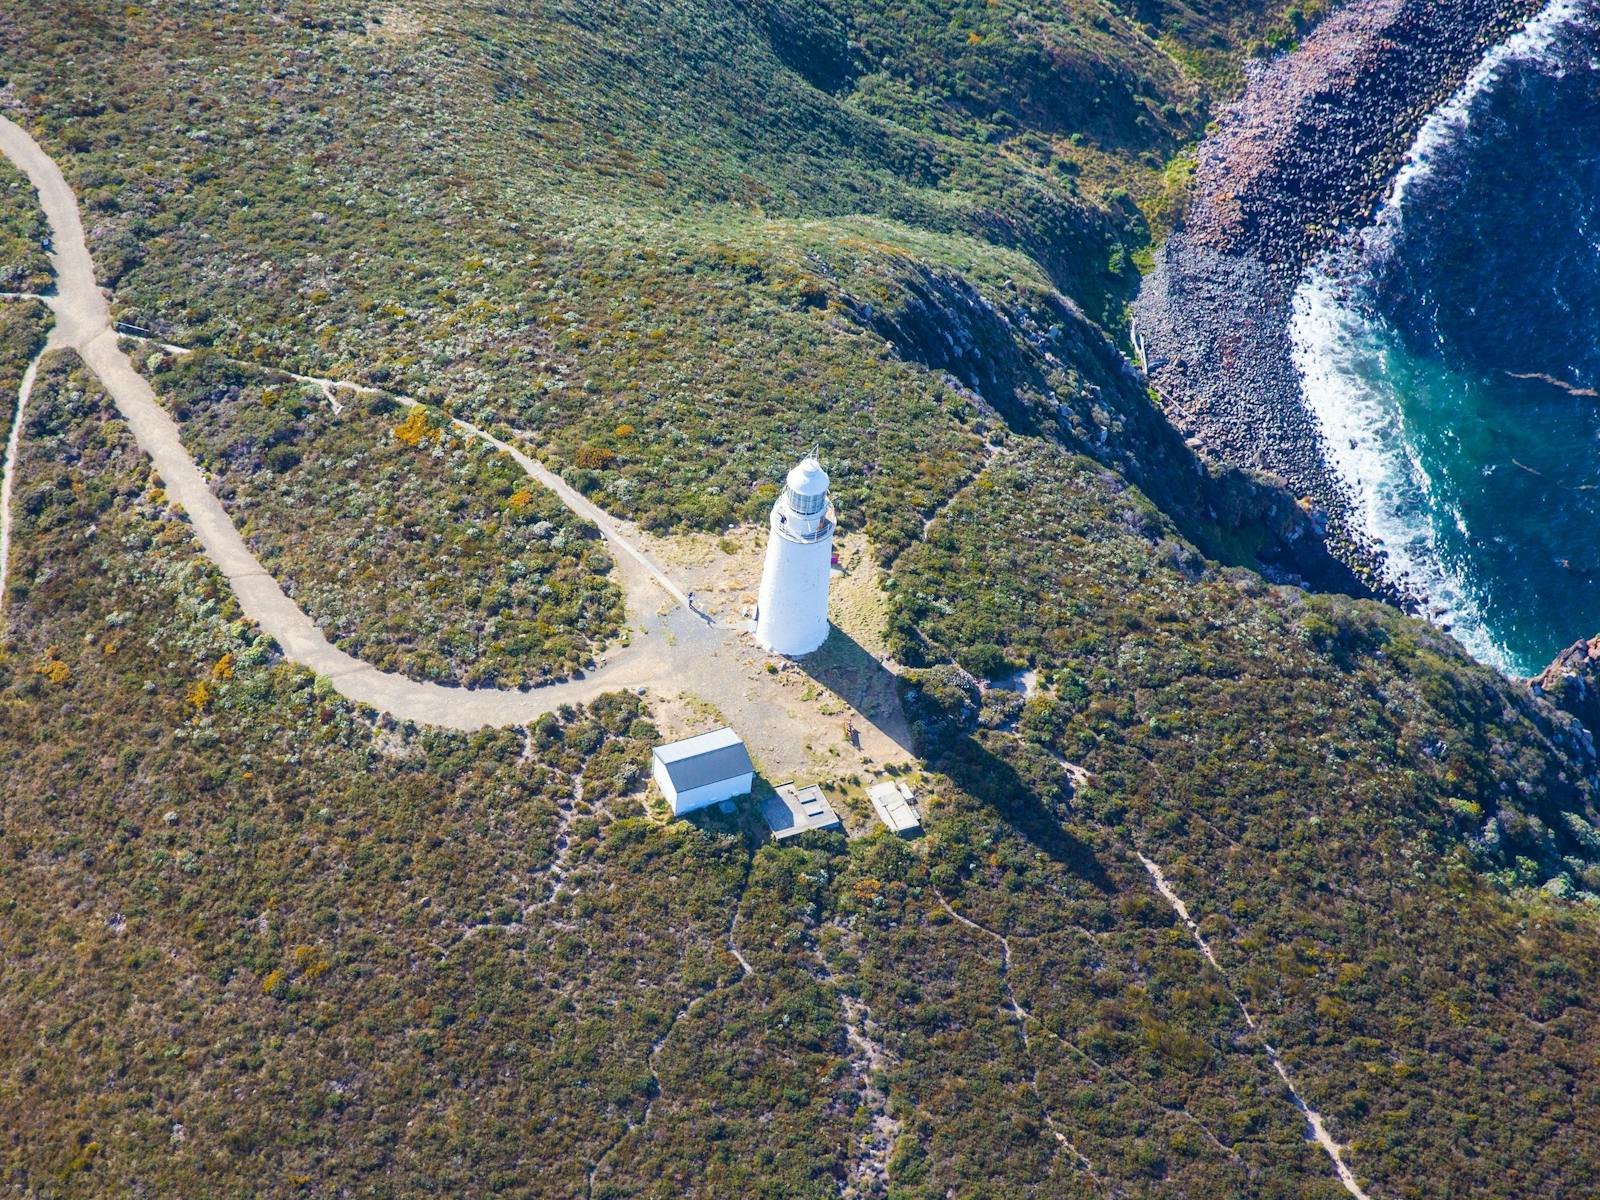 Bruny Island Lighthouse Tours operate daily